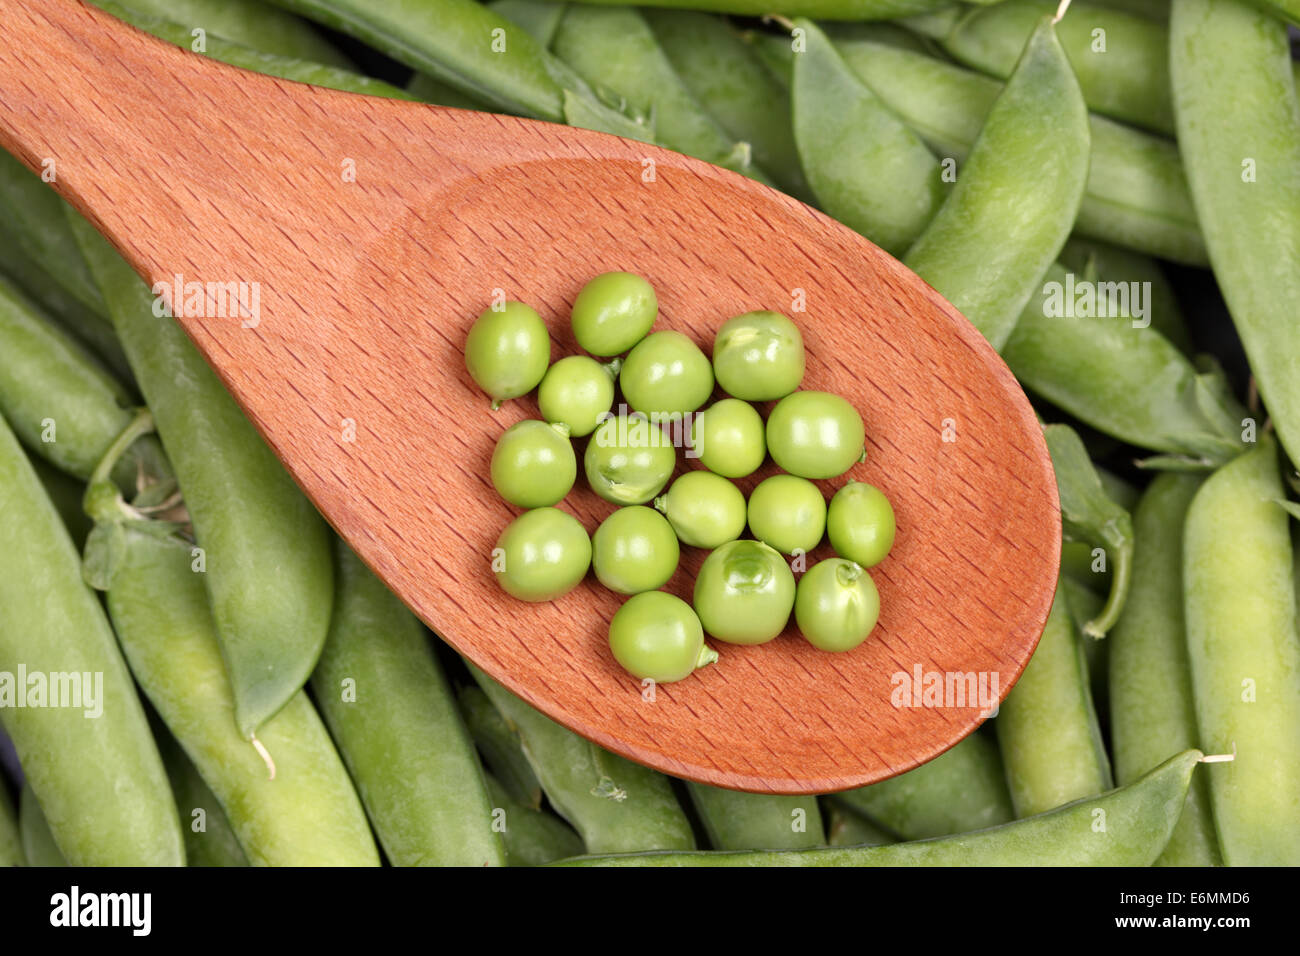 Green peas in a wooden spoon on green pea in the pod background. Stock Photo